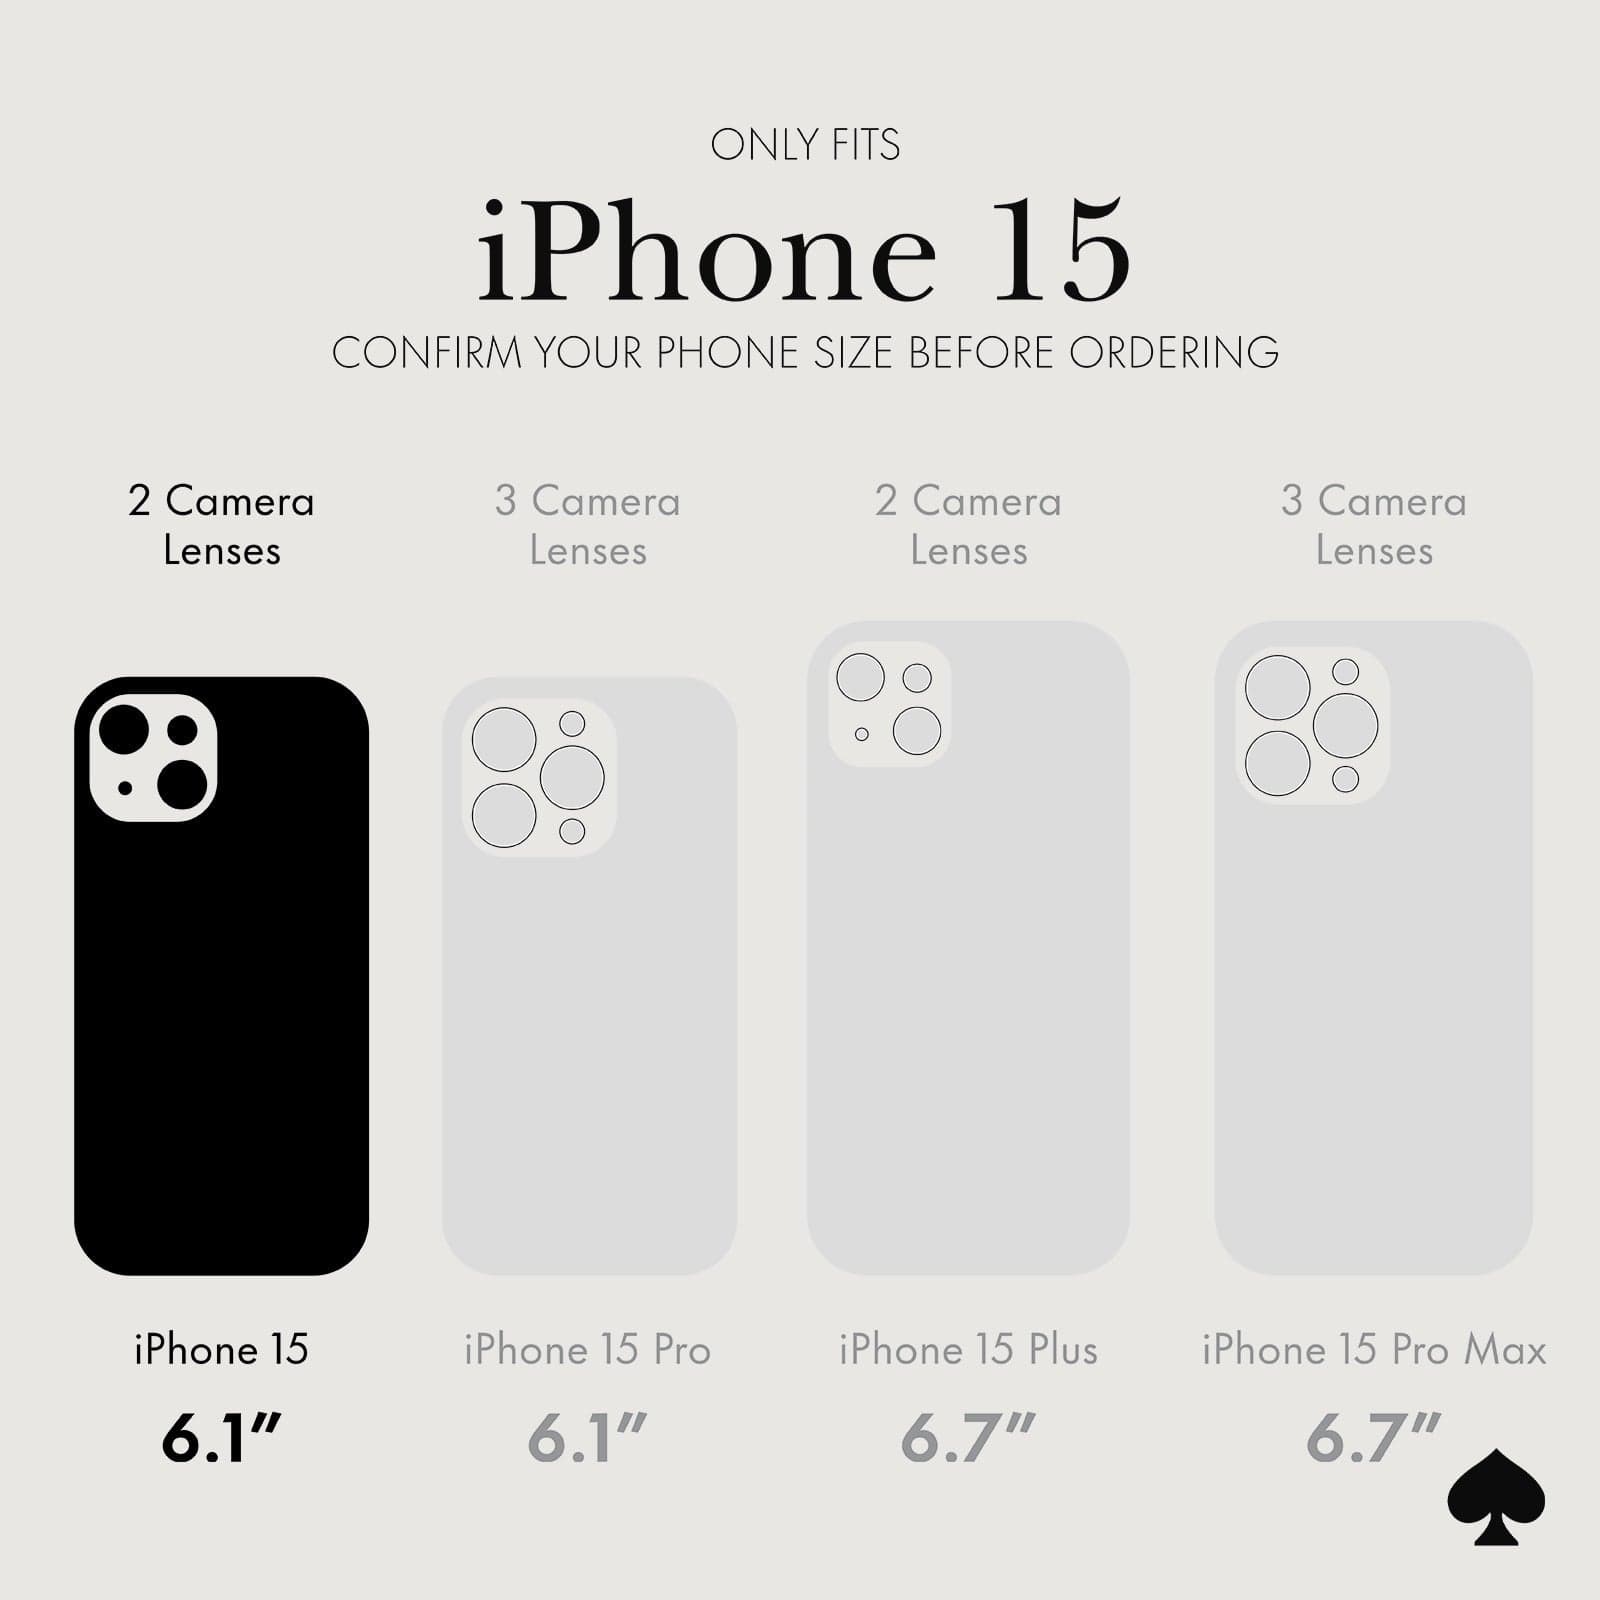 ONLY FITS WITH IPHONE 15 CONFIRM YOUR PHONE SIZE BEFORE ORDERING